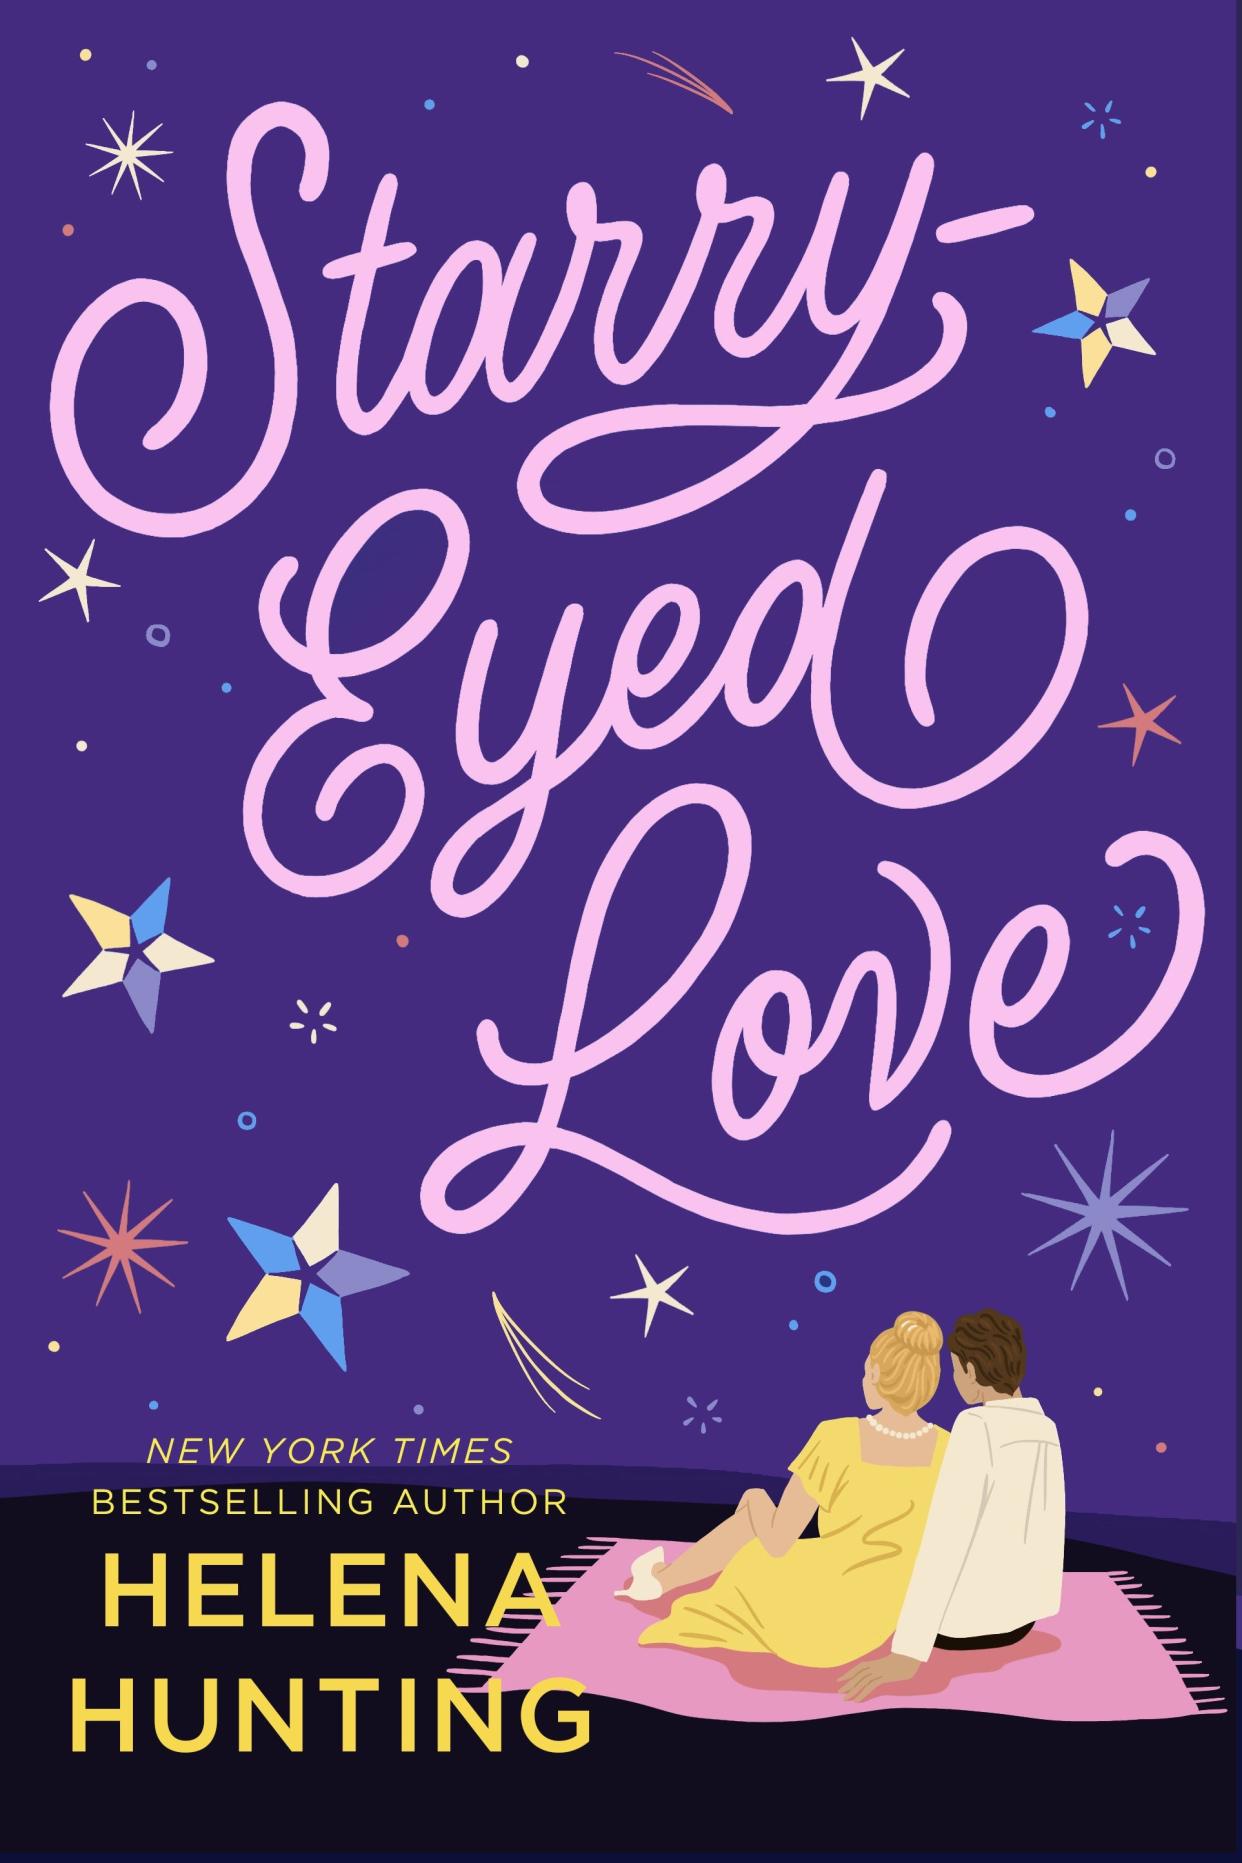 "Starry-Eyed Love," by Helena Hunting